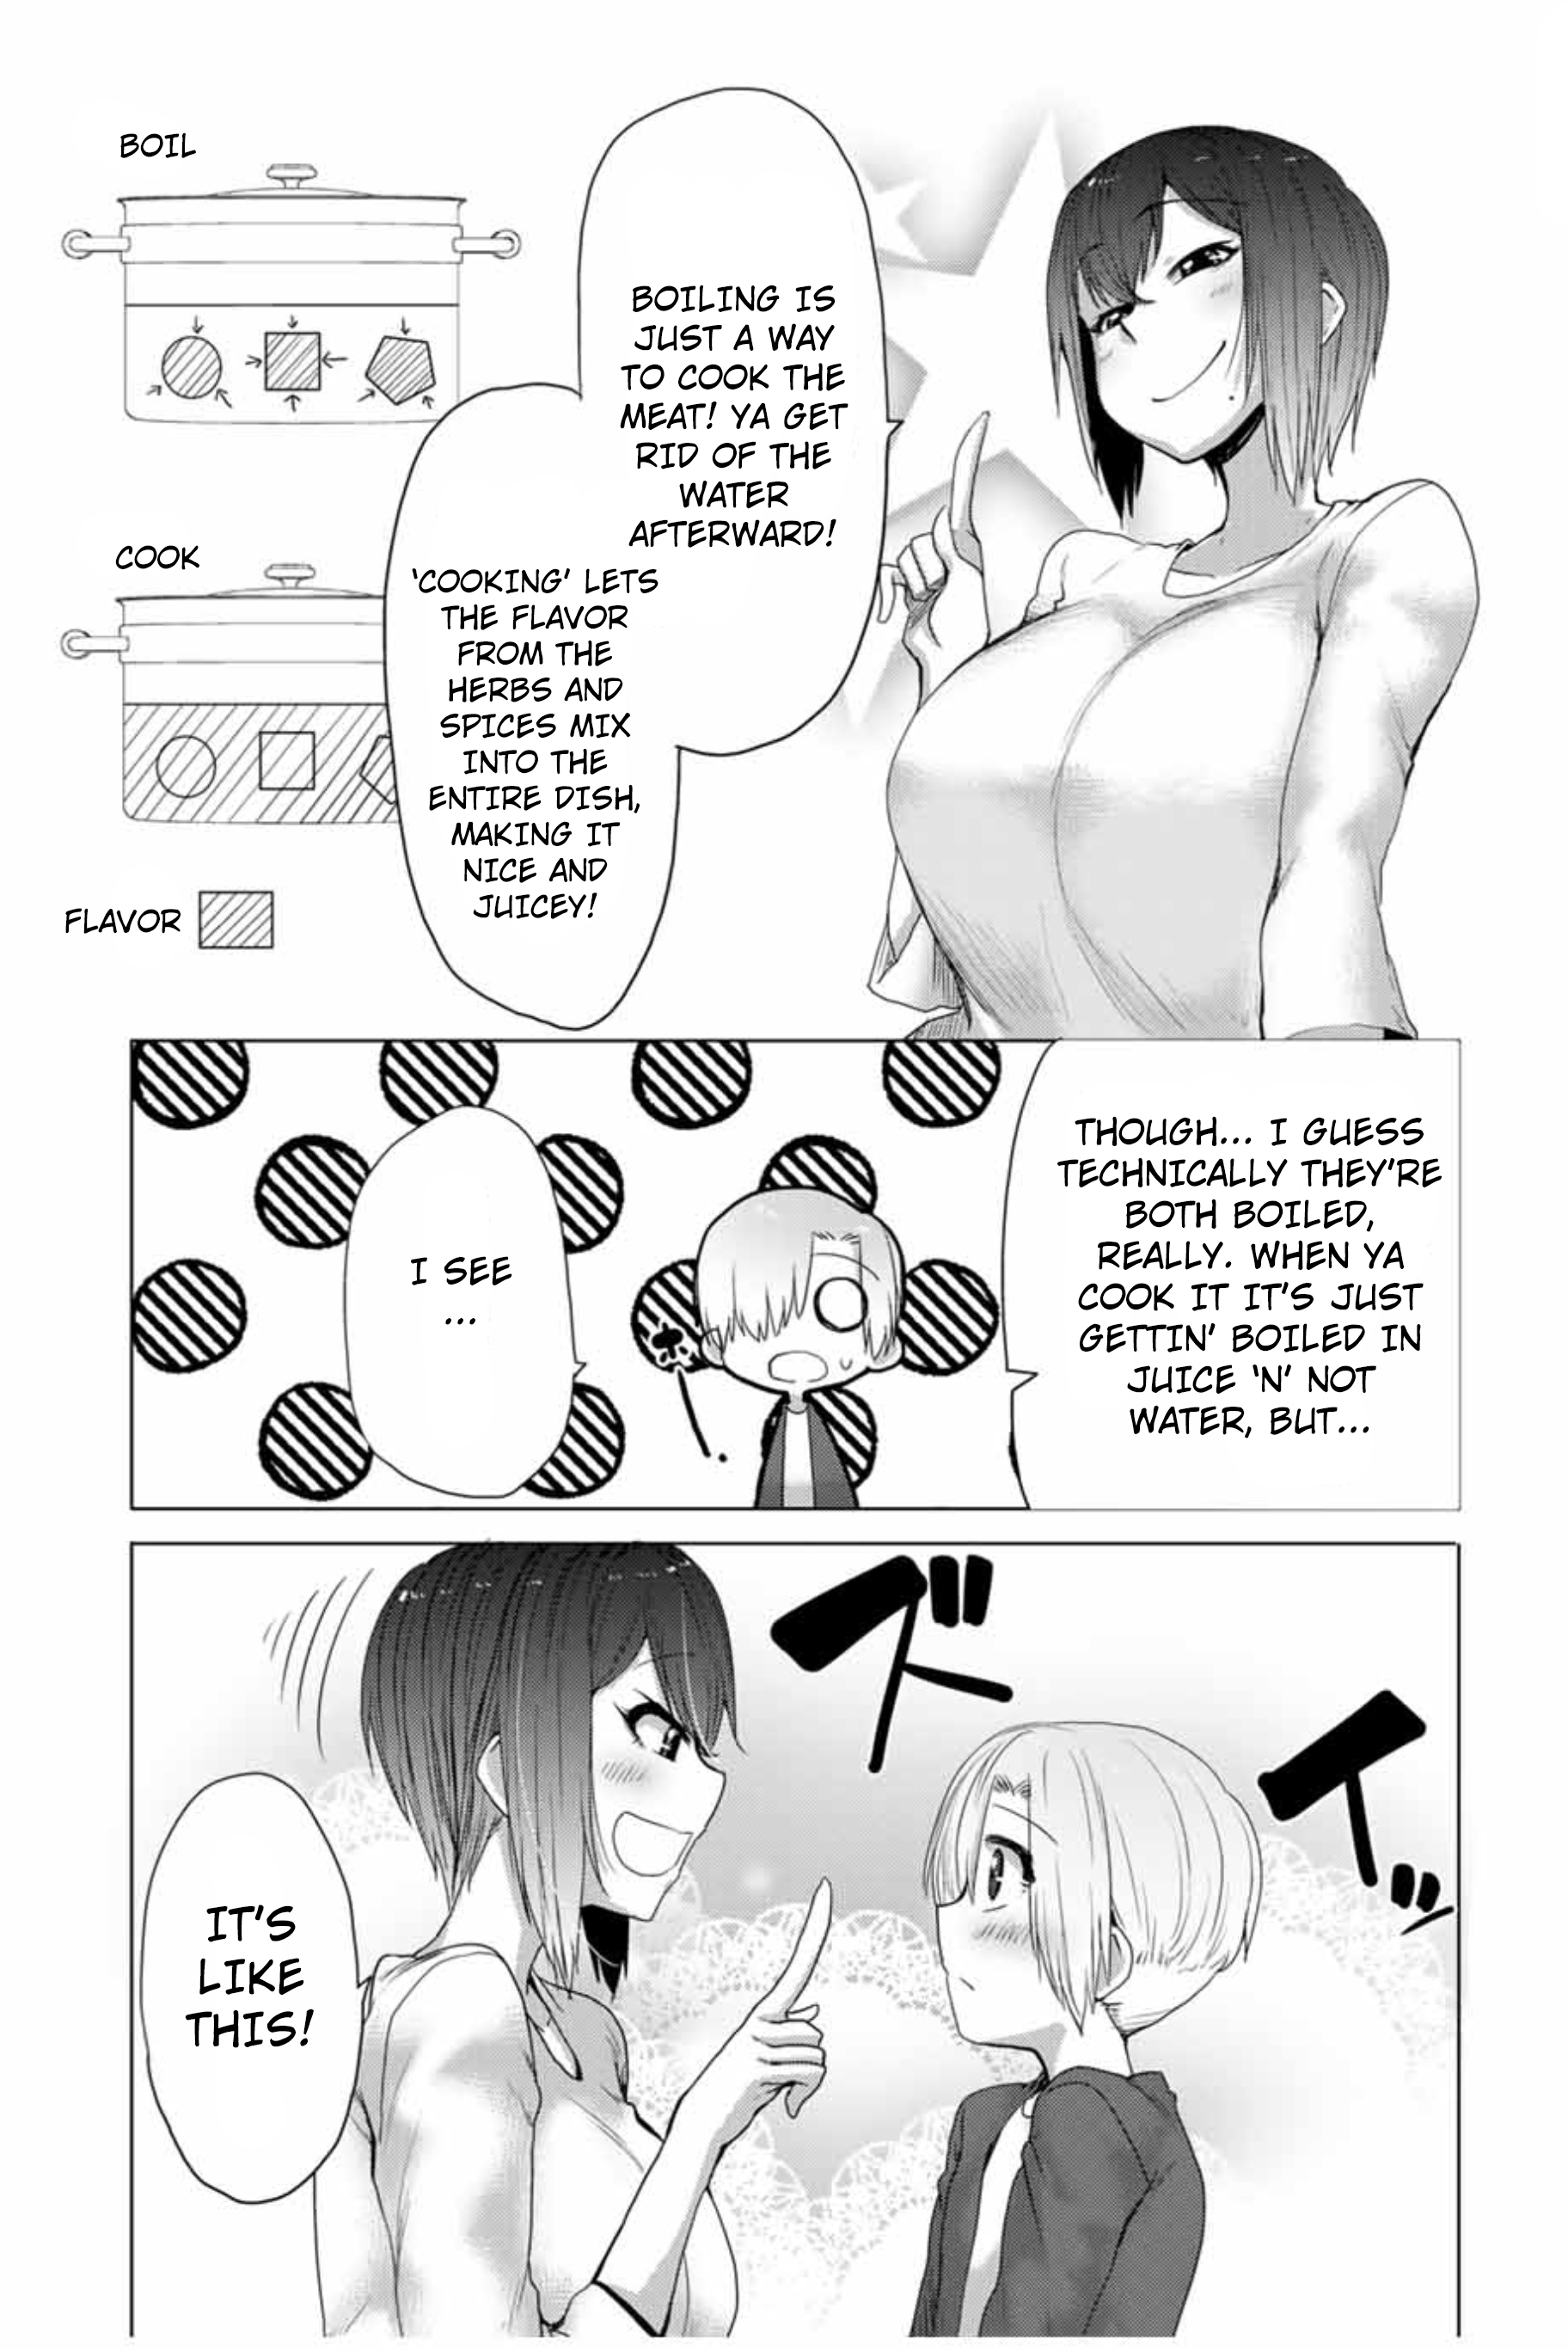 The Girl with a Kansai Accent and the Pure Boy - Chapter 16 Page 9